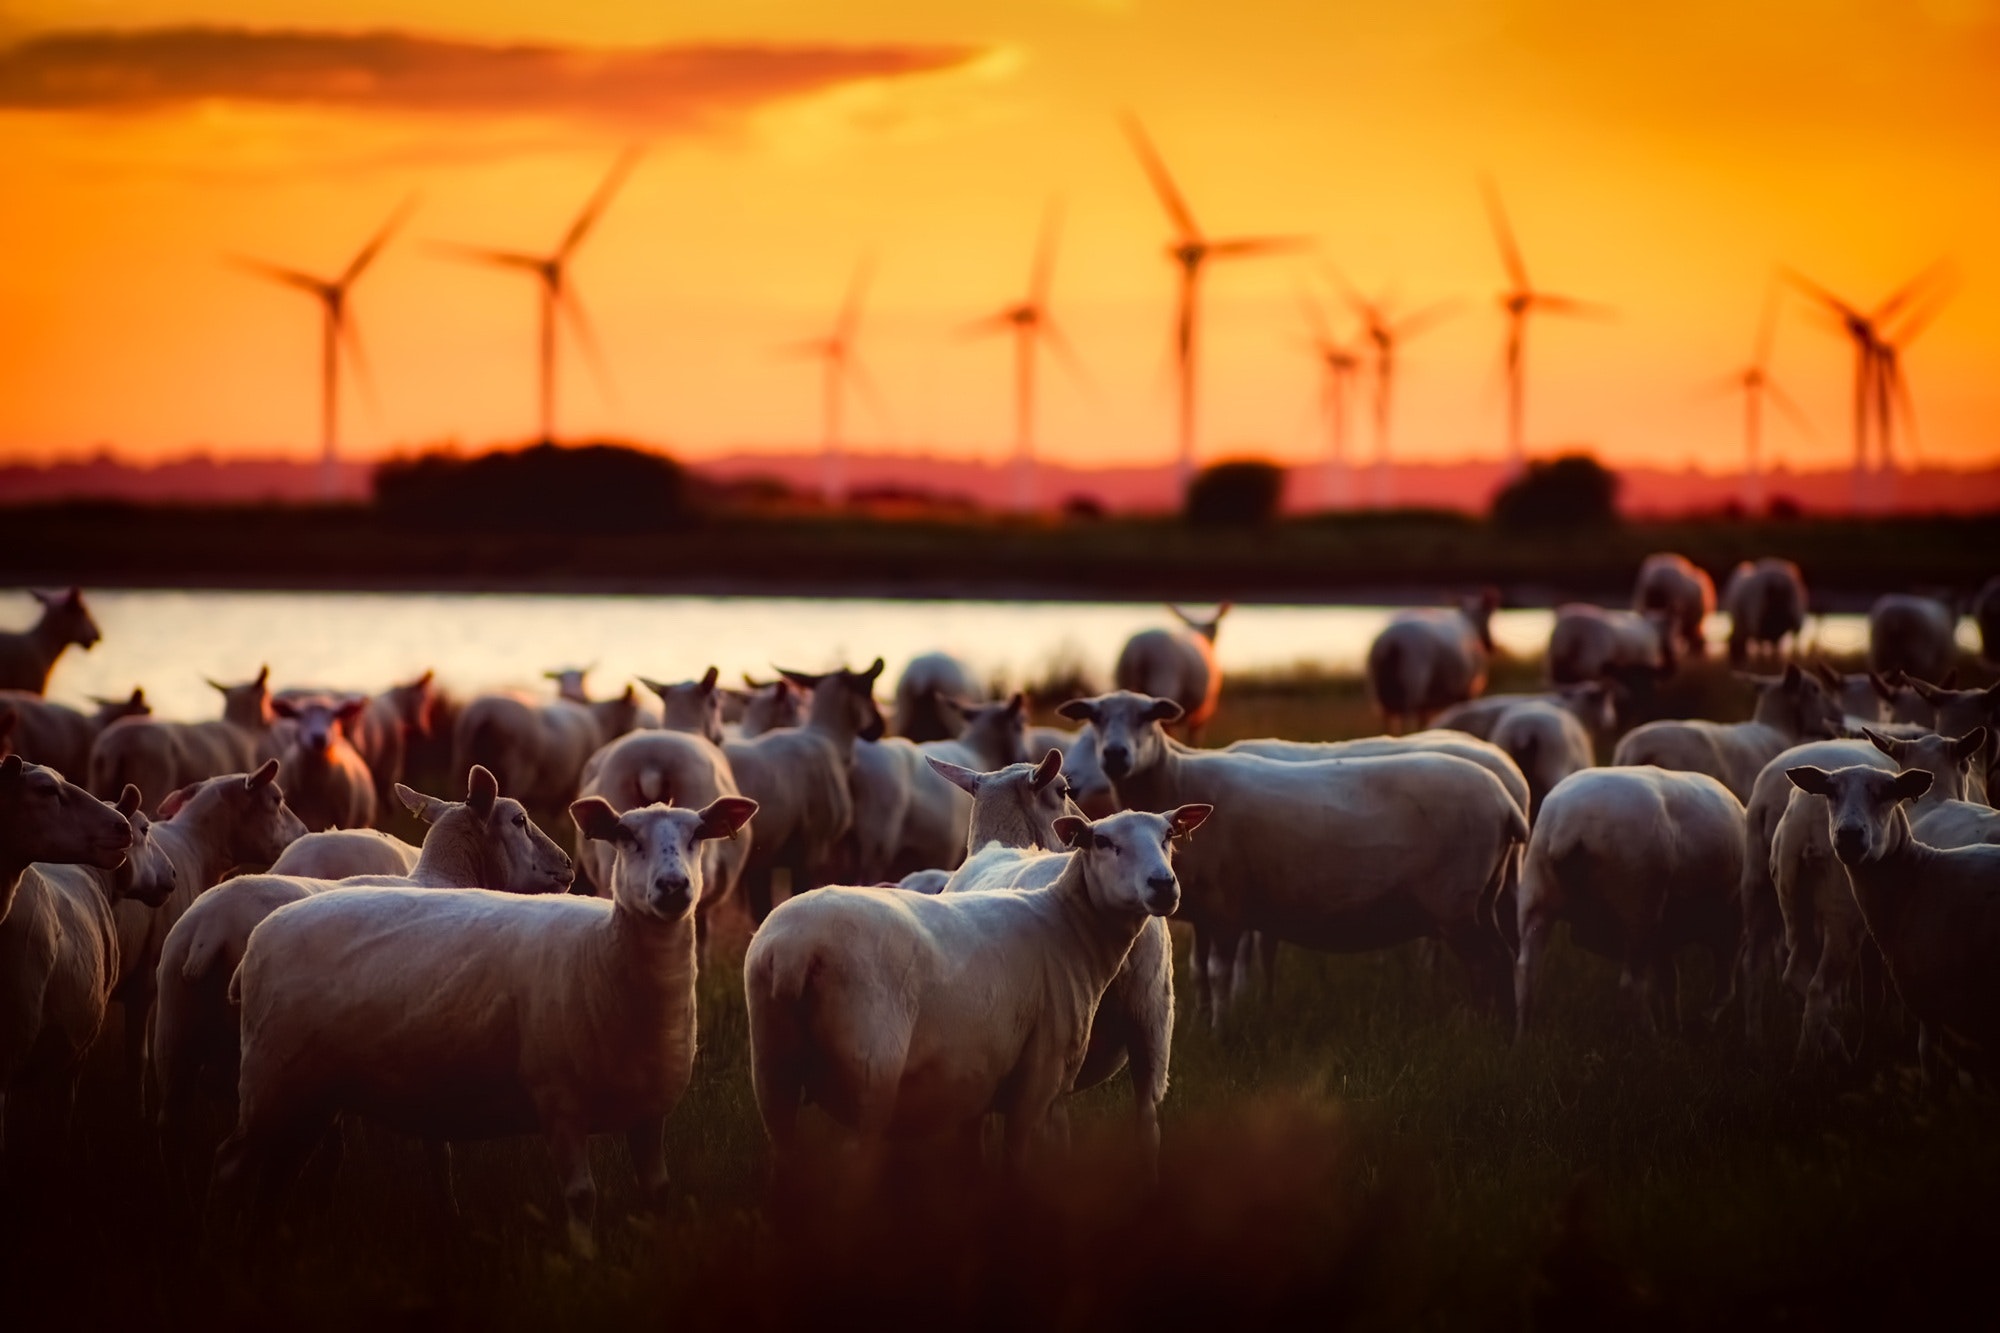 Healthy, freshly shorn sheep standing in a pasture with wind turbines and a beautiful sunset in the background.